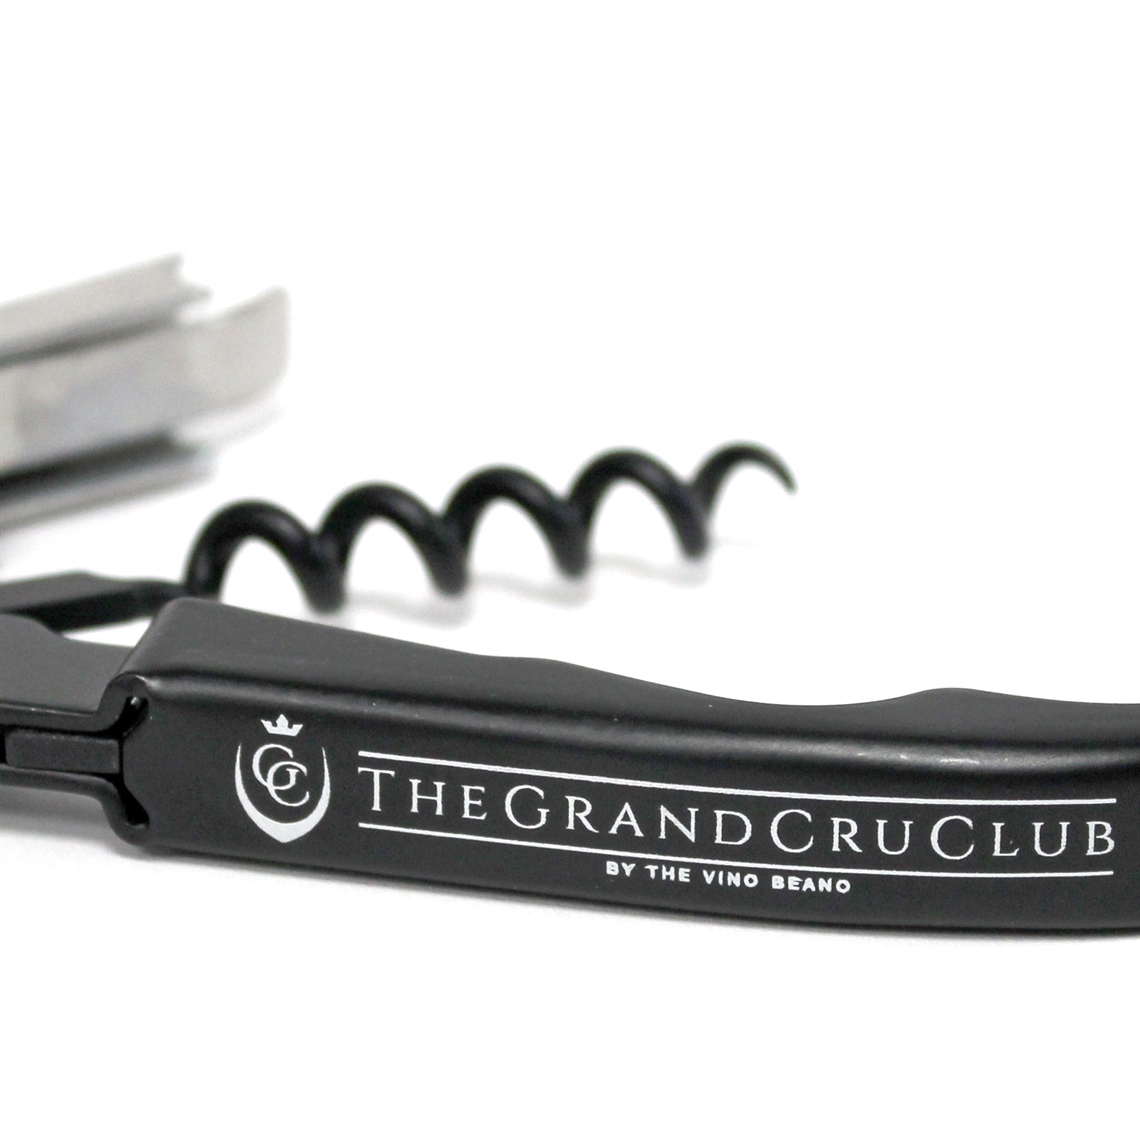 View more lever model / twisters from our Branded Corkscrews & Bottle Openers range